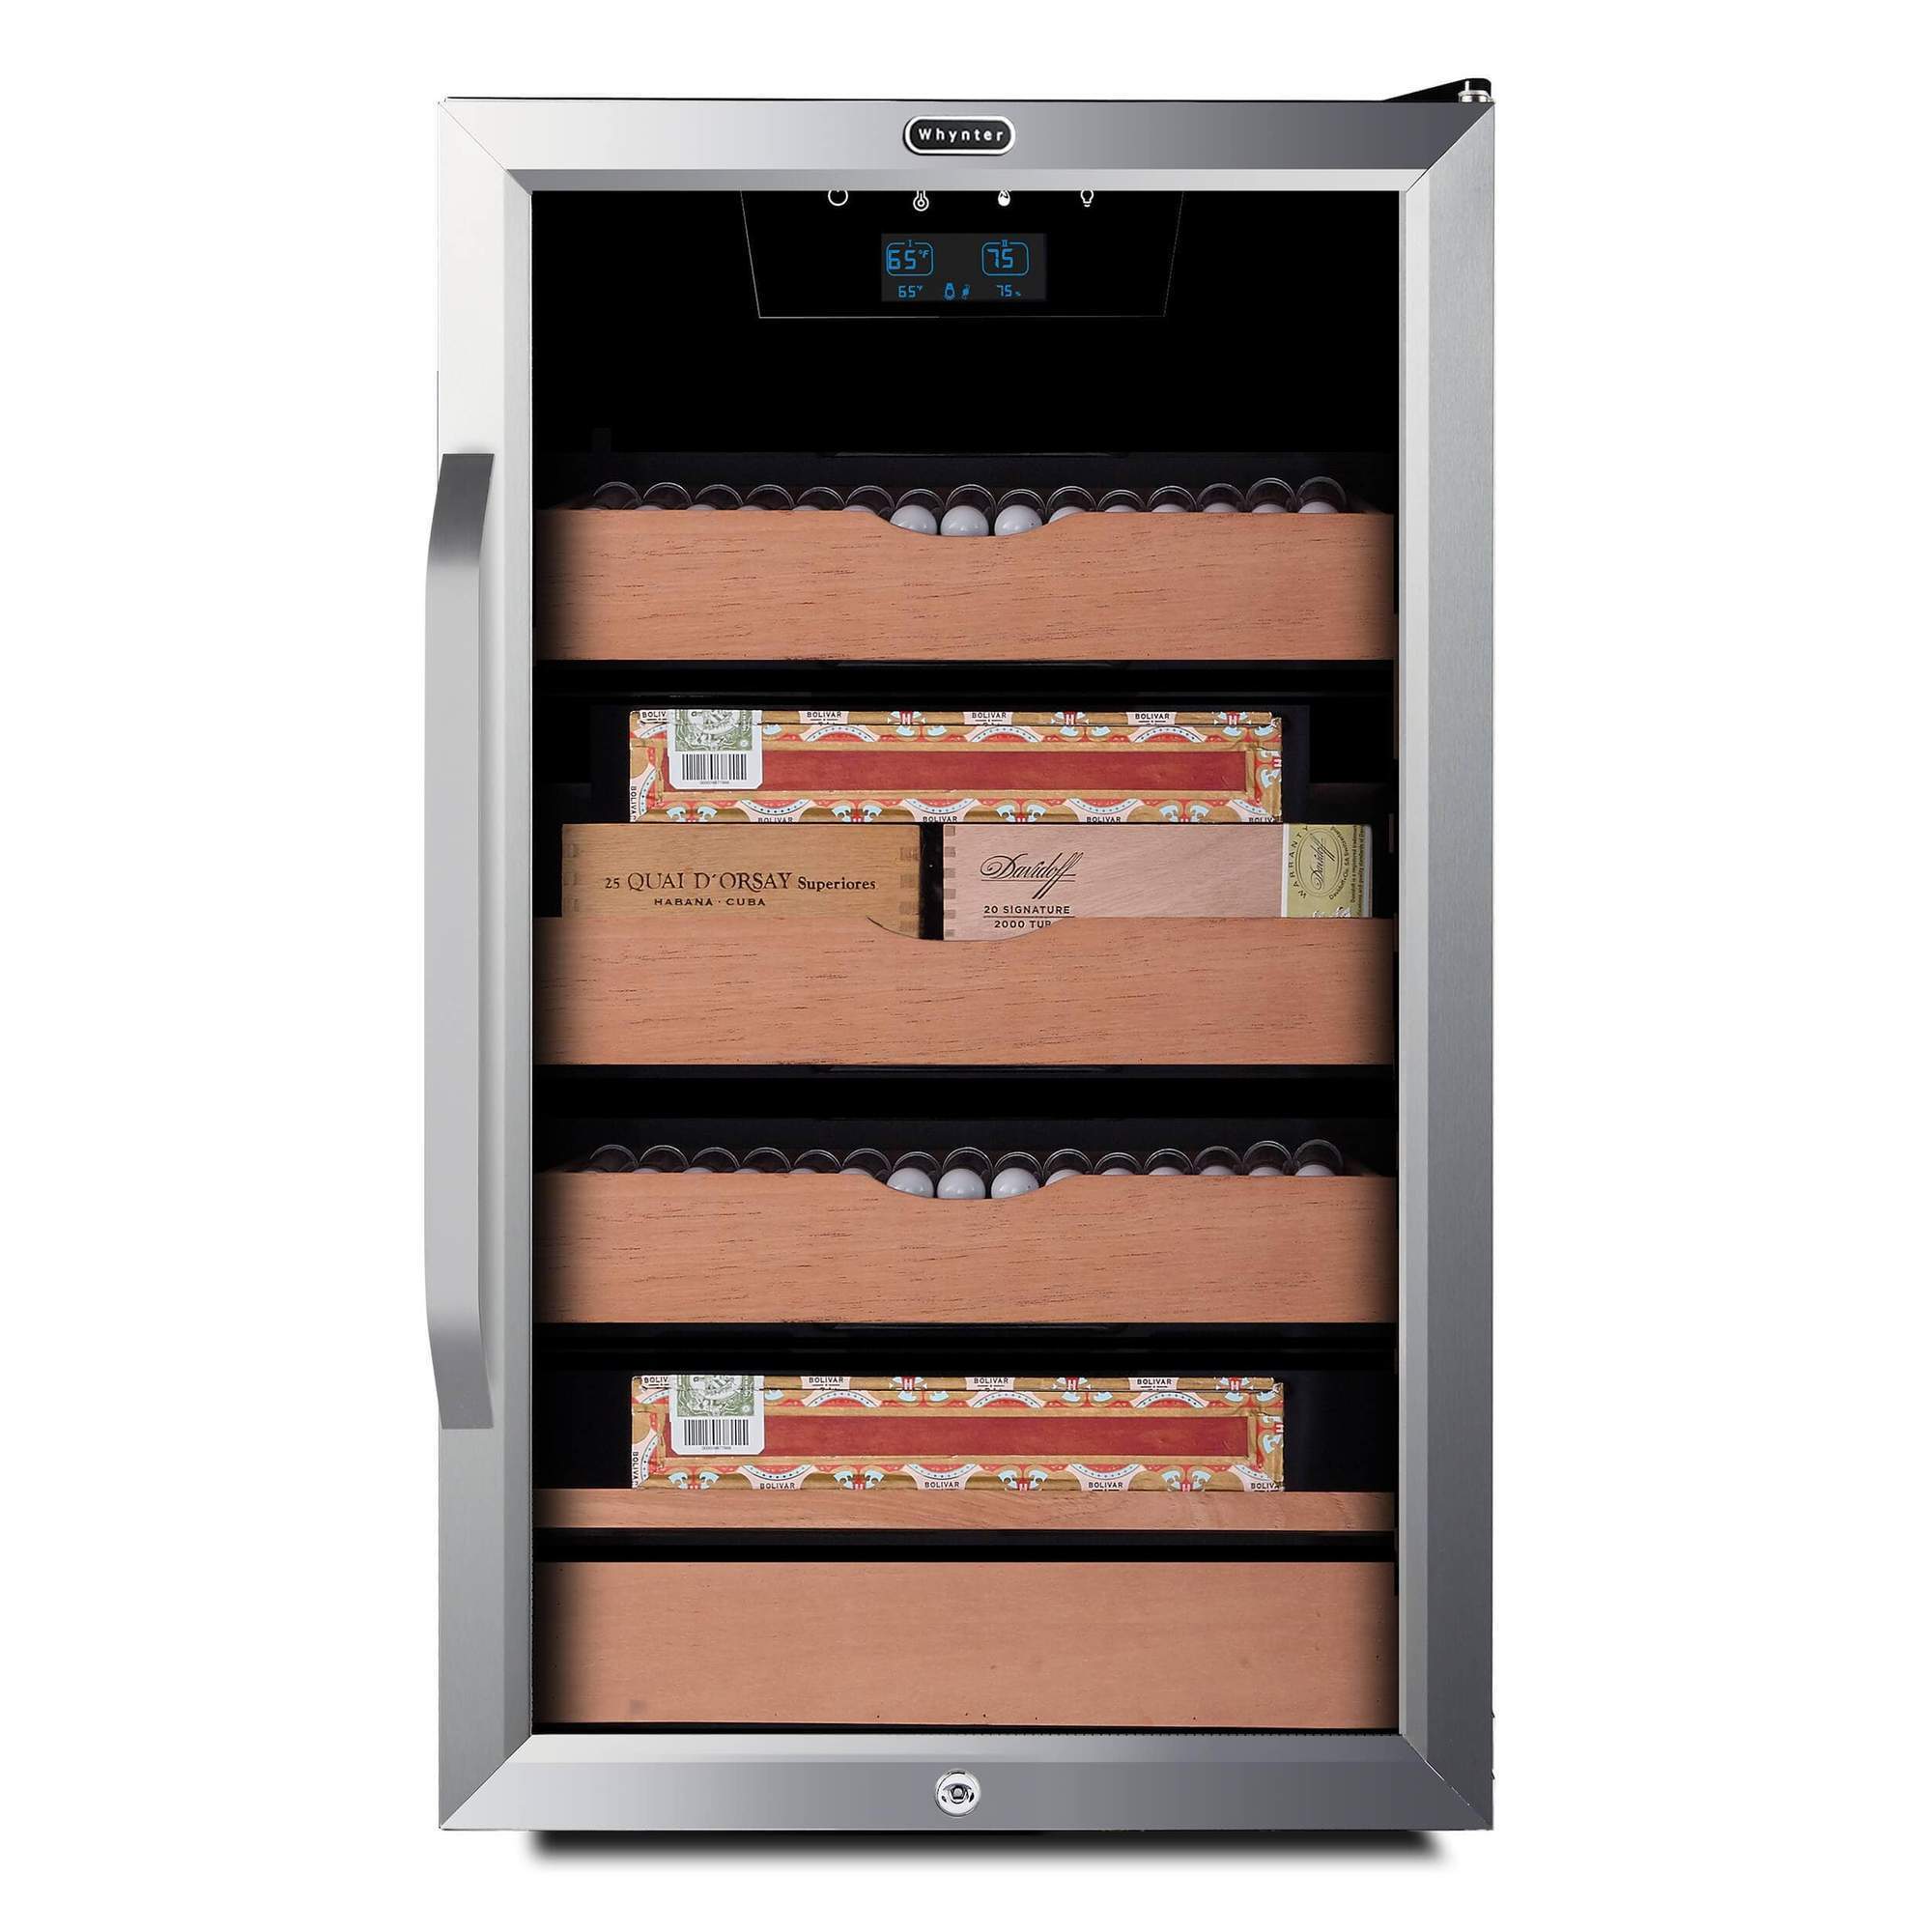 Cigar Cooler Humidors for Sale